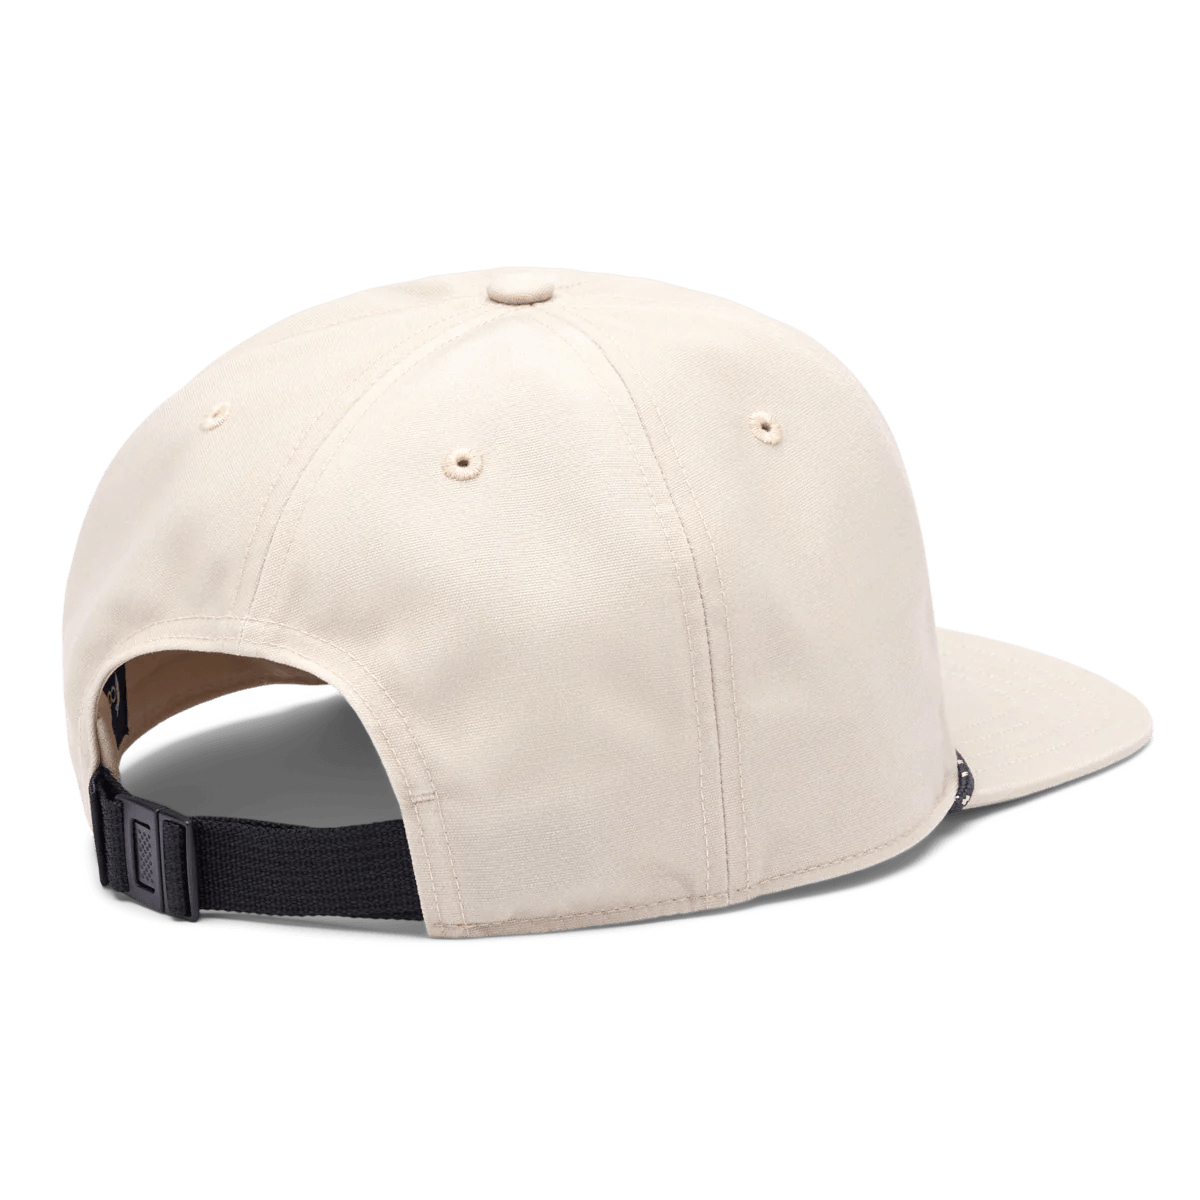 Cotopaxi - Cotopaxi Western Hills Heritage Rope Hat - The Shoe Collective